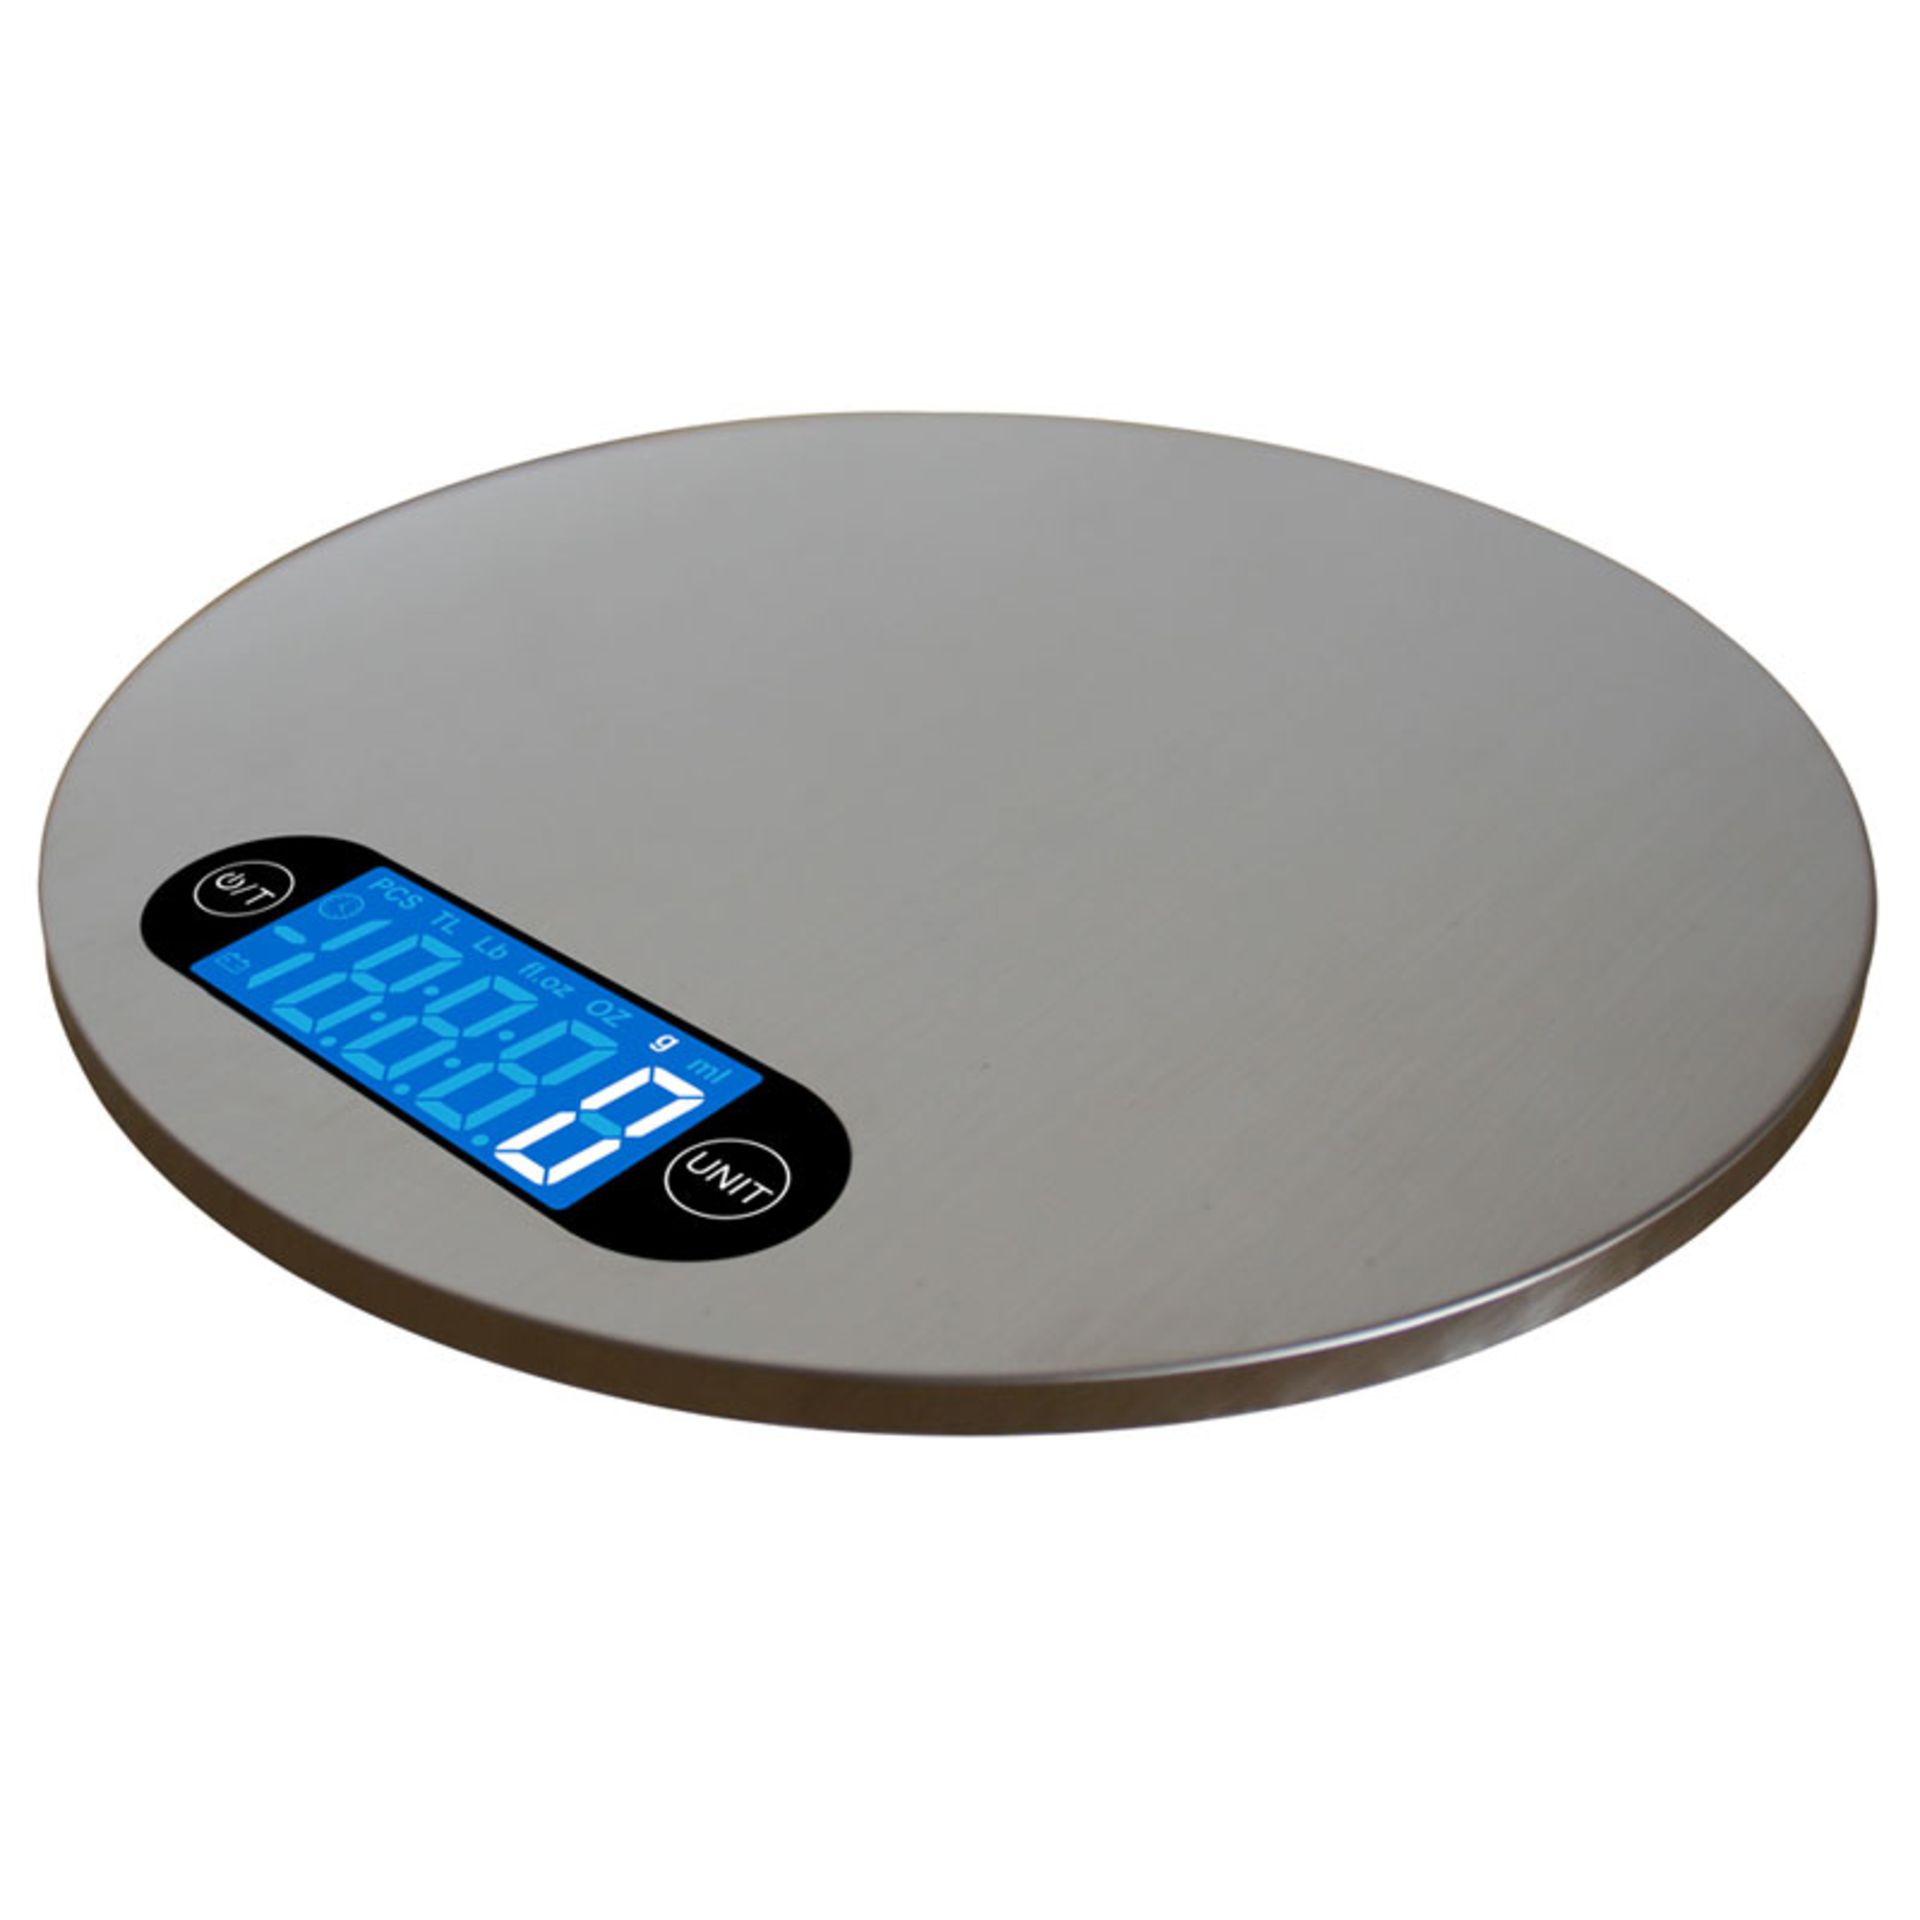 V Brand New Kitchen Collection Digital Kitchen Scales-Large LCD Display-Stainless Steel Weighing - Image 4 of 4